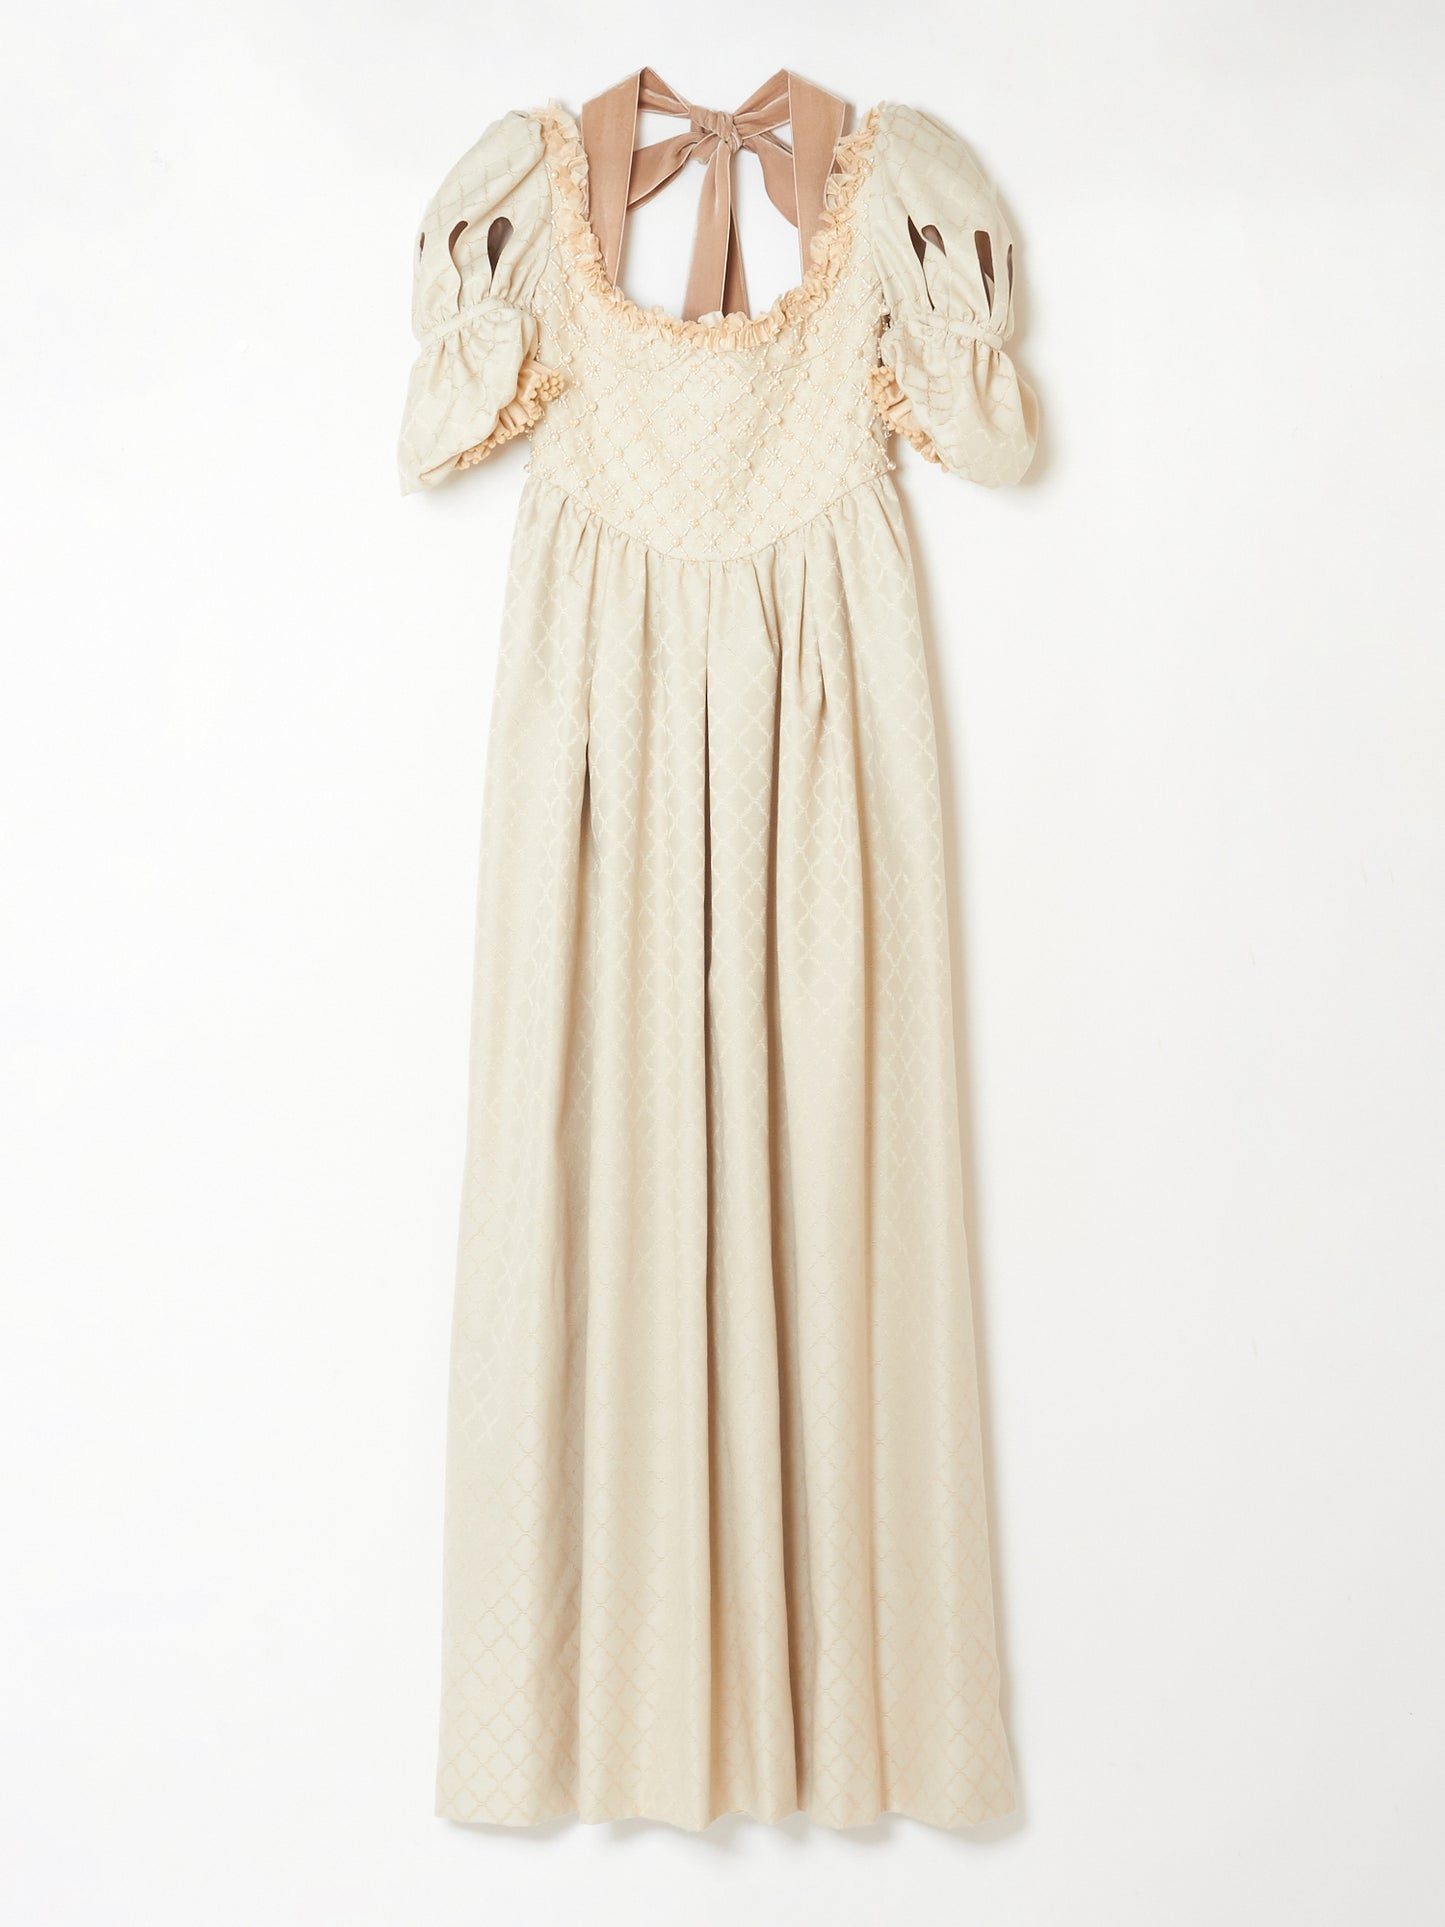 Morroccan patern pearl dress【Delivery in December 2023】